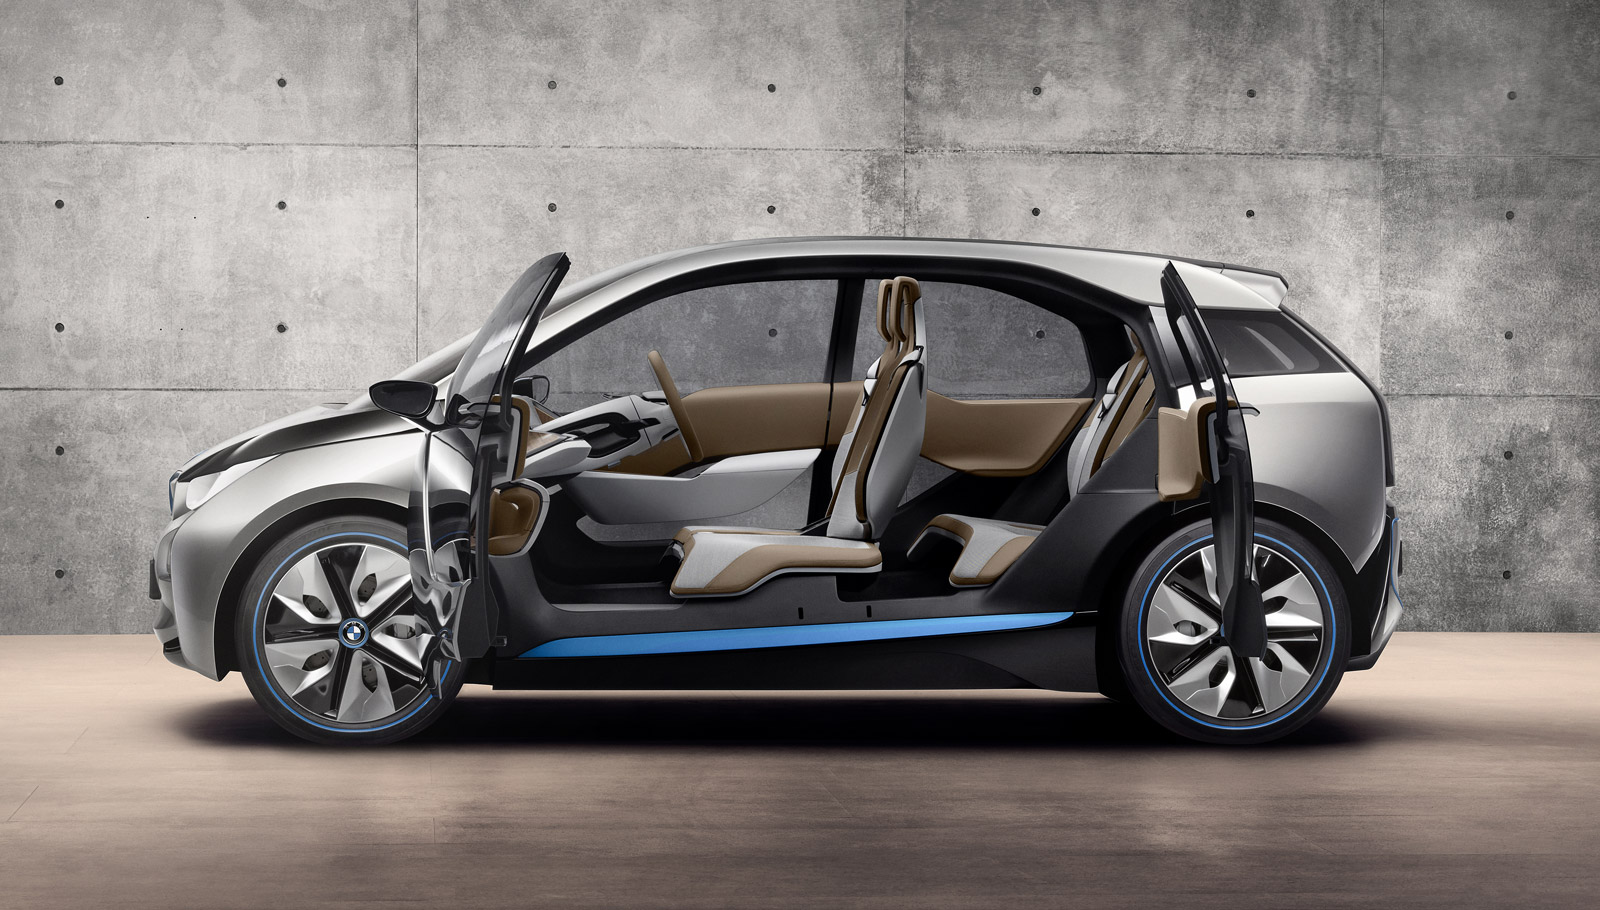 2014 BMW i3 Electric Car Price How Much Will It Cost?